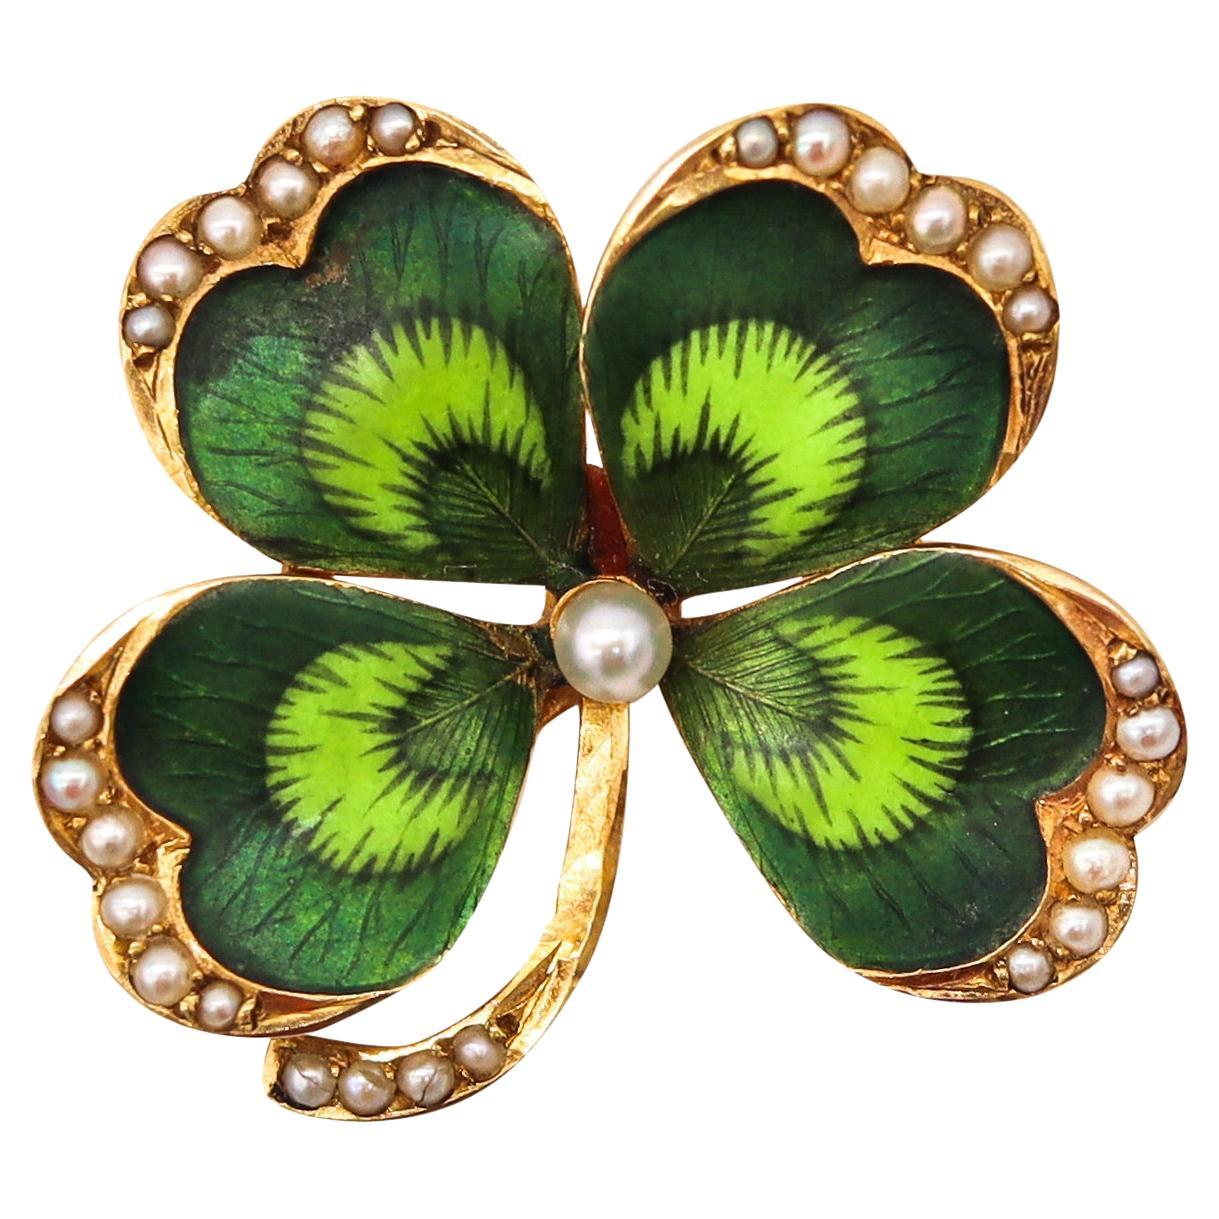 Krementz Art Nouveau 1900 Clover Enameled Brooch in 18Kt Gold with Natural Pearl